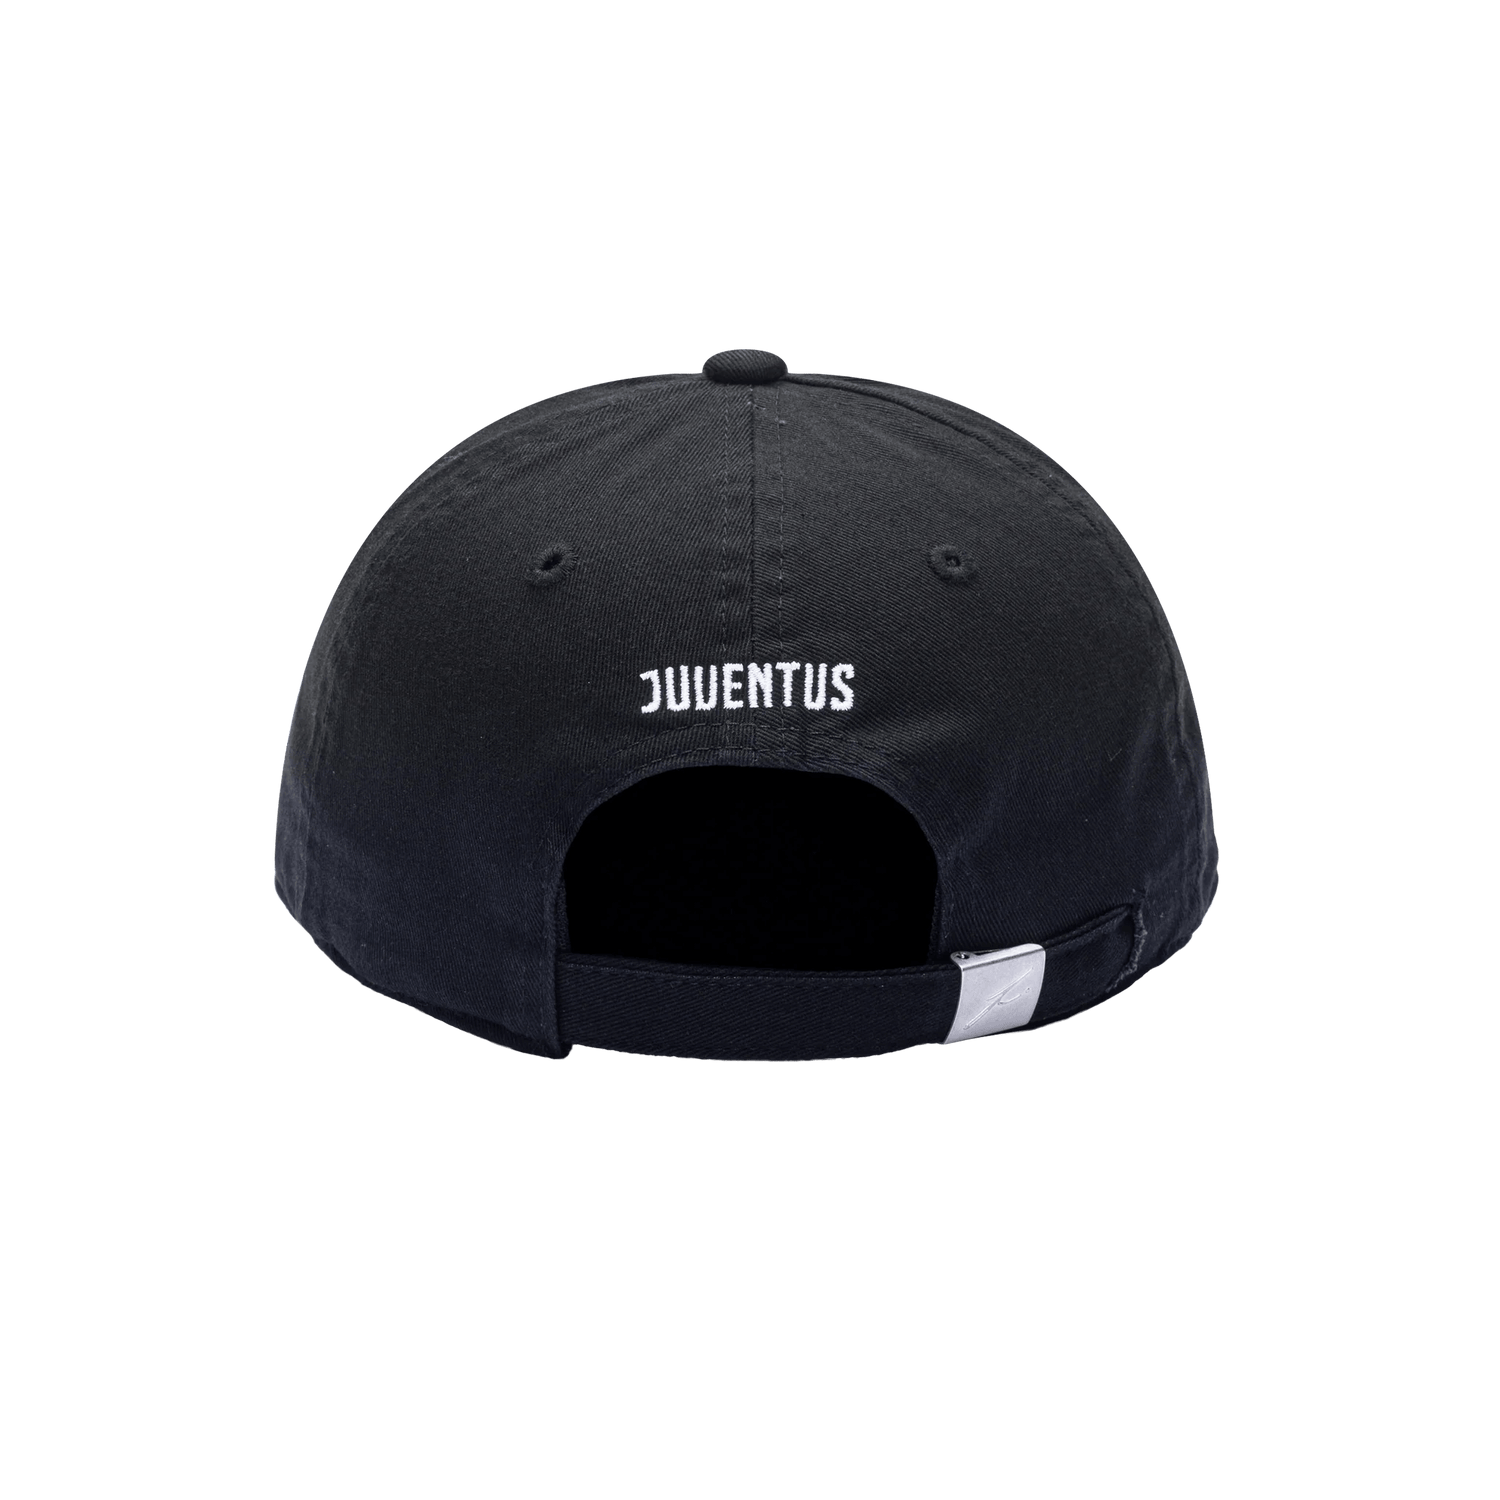 FI Collection Club Juventus Bambo Classic Hat (Back)